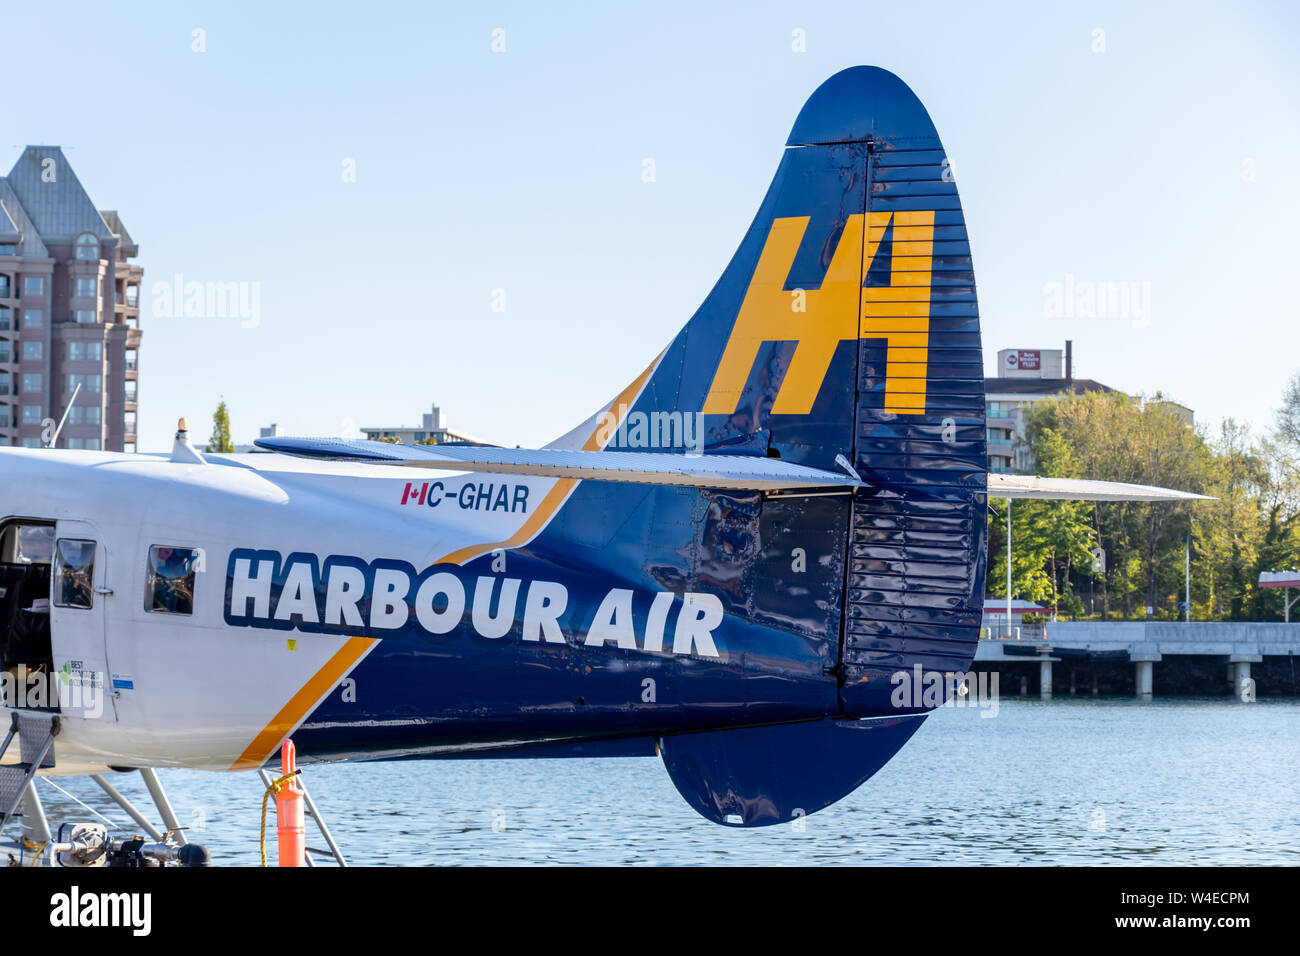 Harbour Air seaplane tail seen while docked at Victoria, BC's Harbour Airport in bright sunlight. Stock Photo